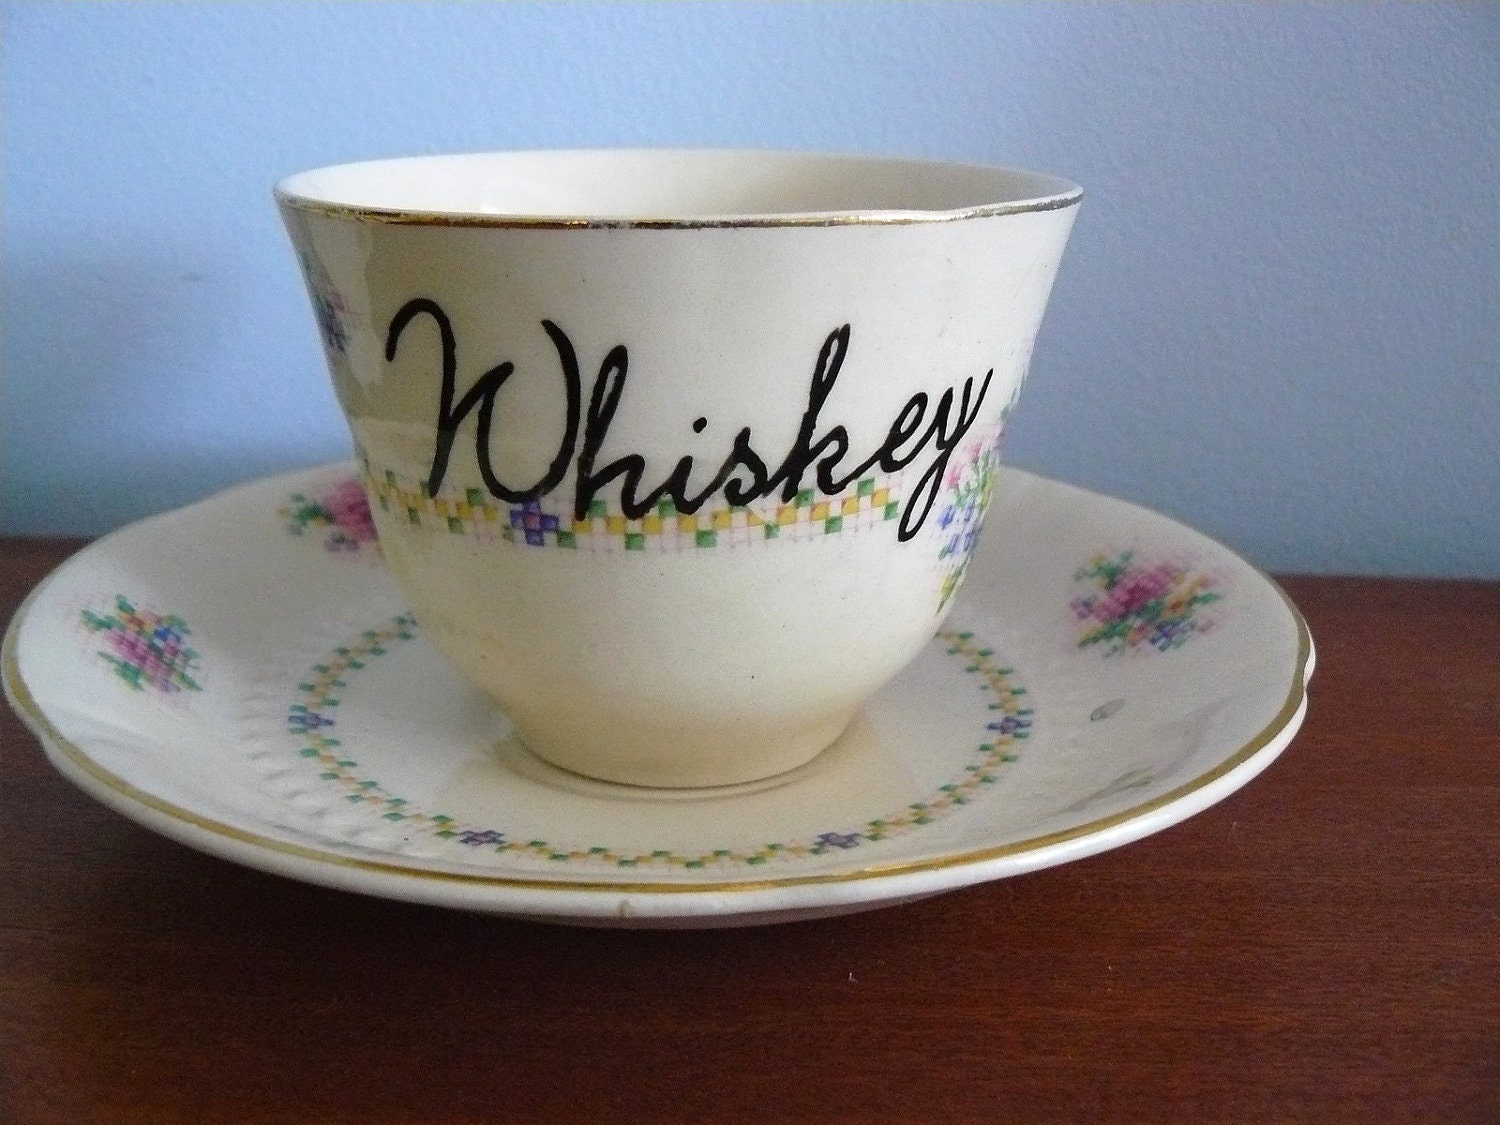 a whiskey in a teacup